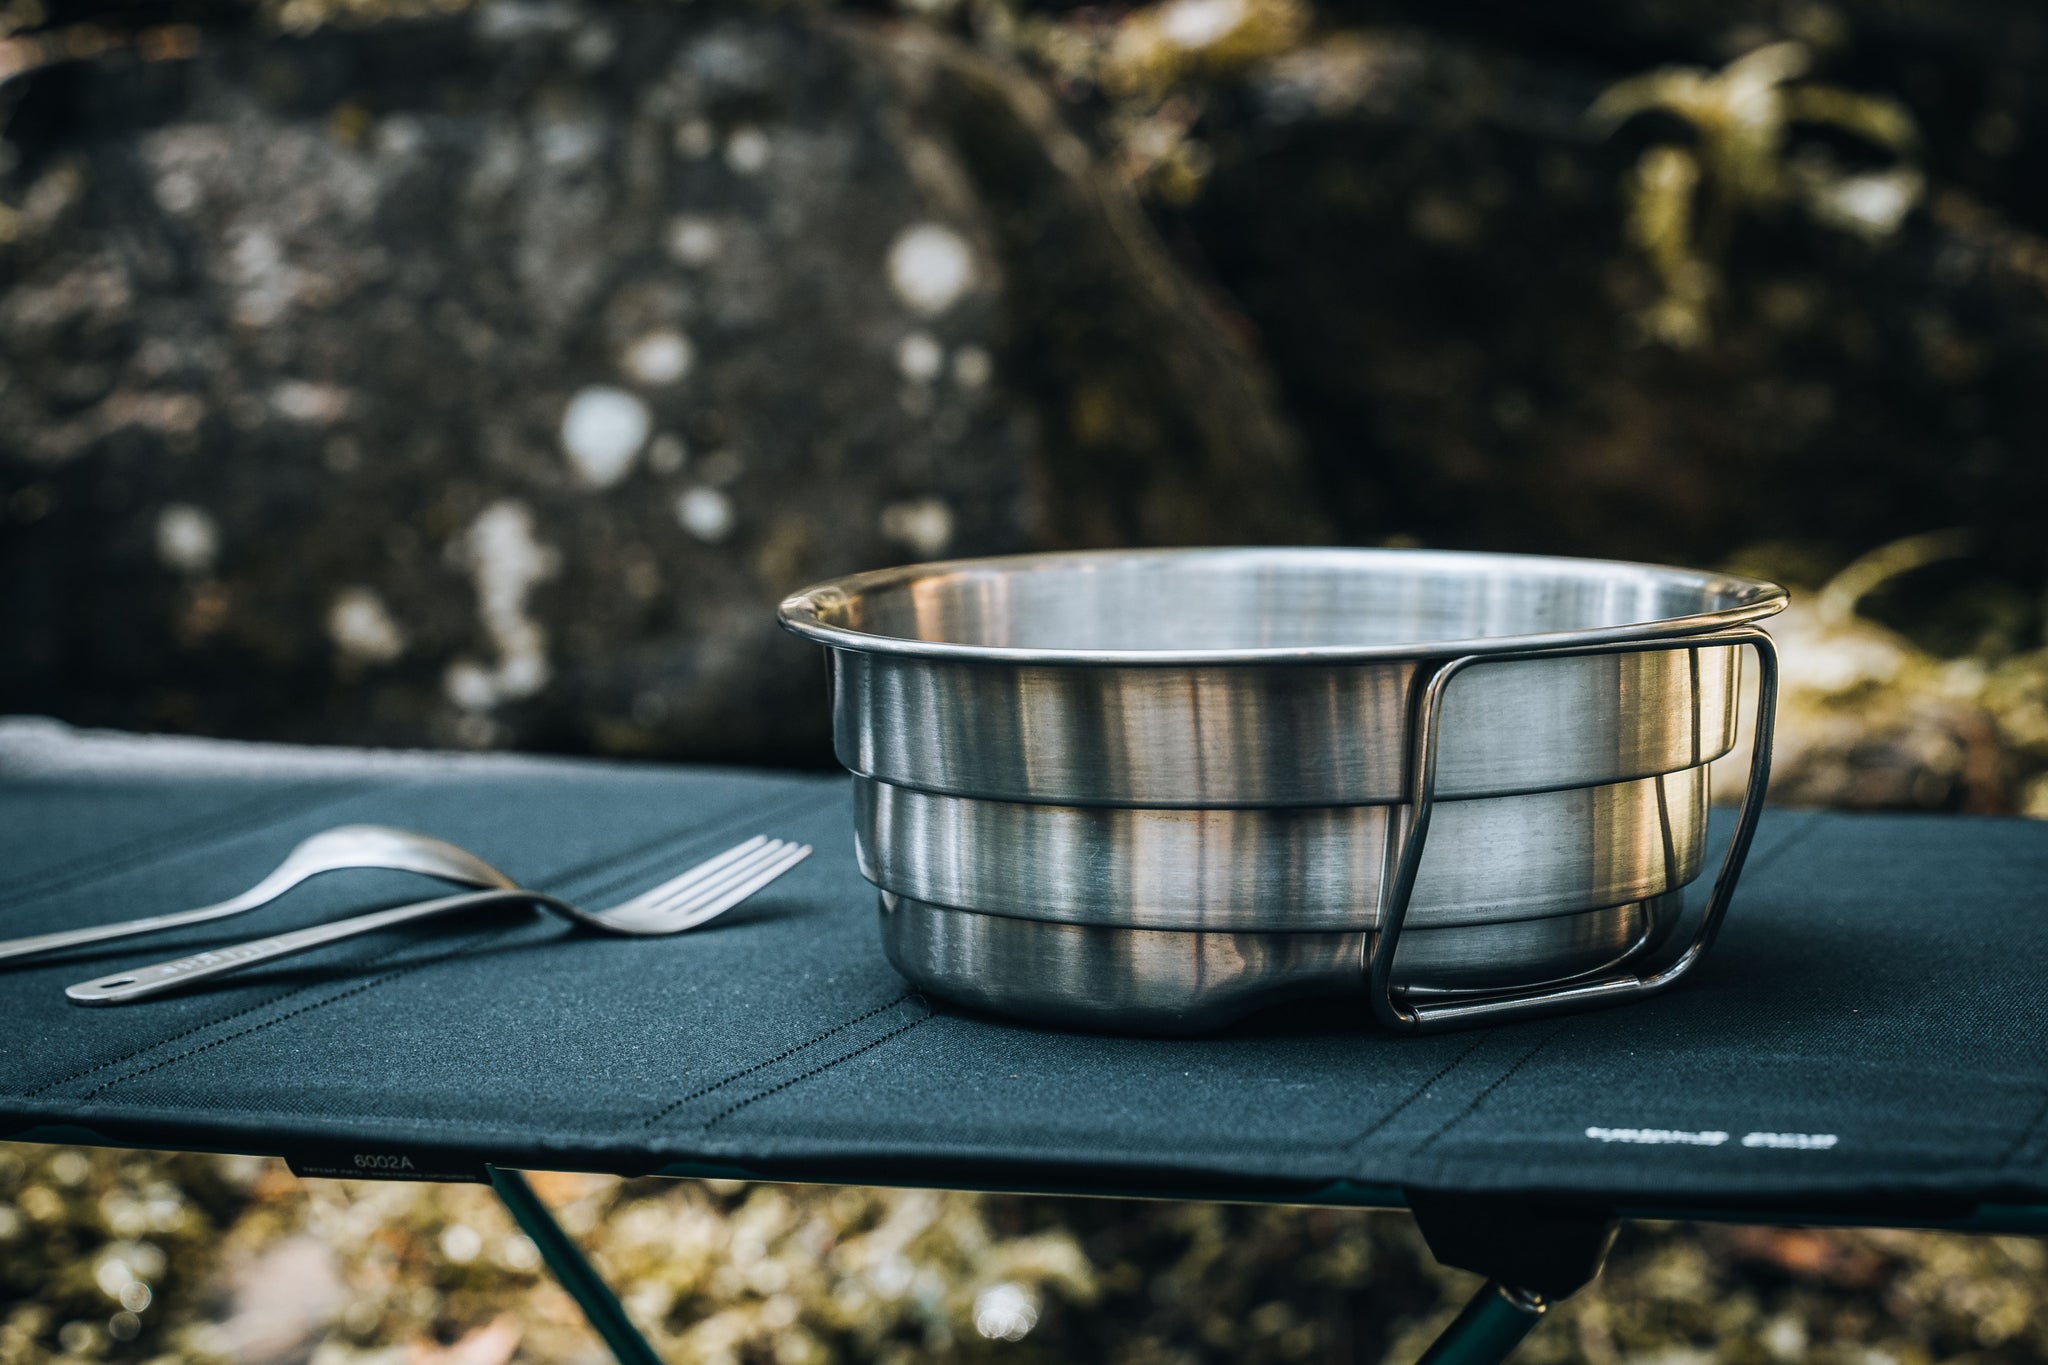 COLLAPSIBLE COOKWARE